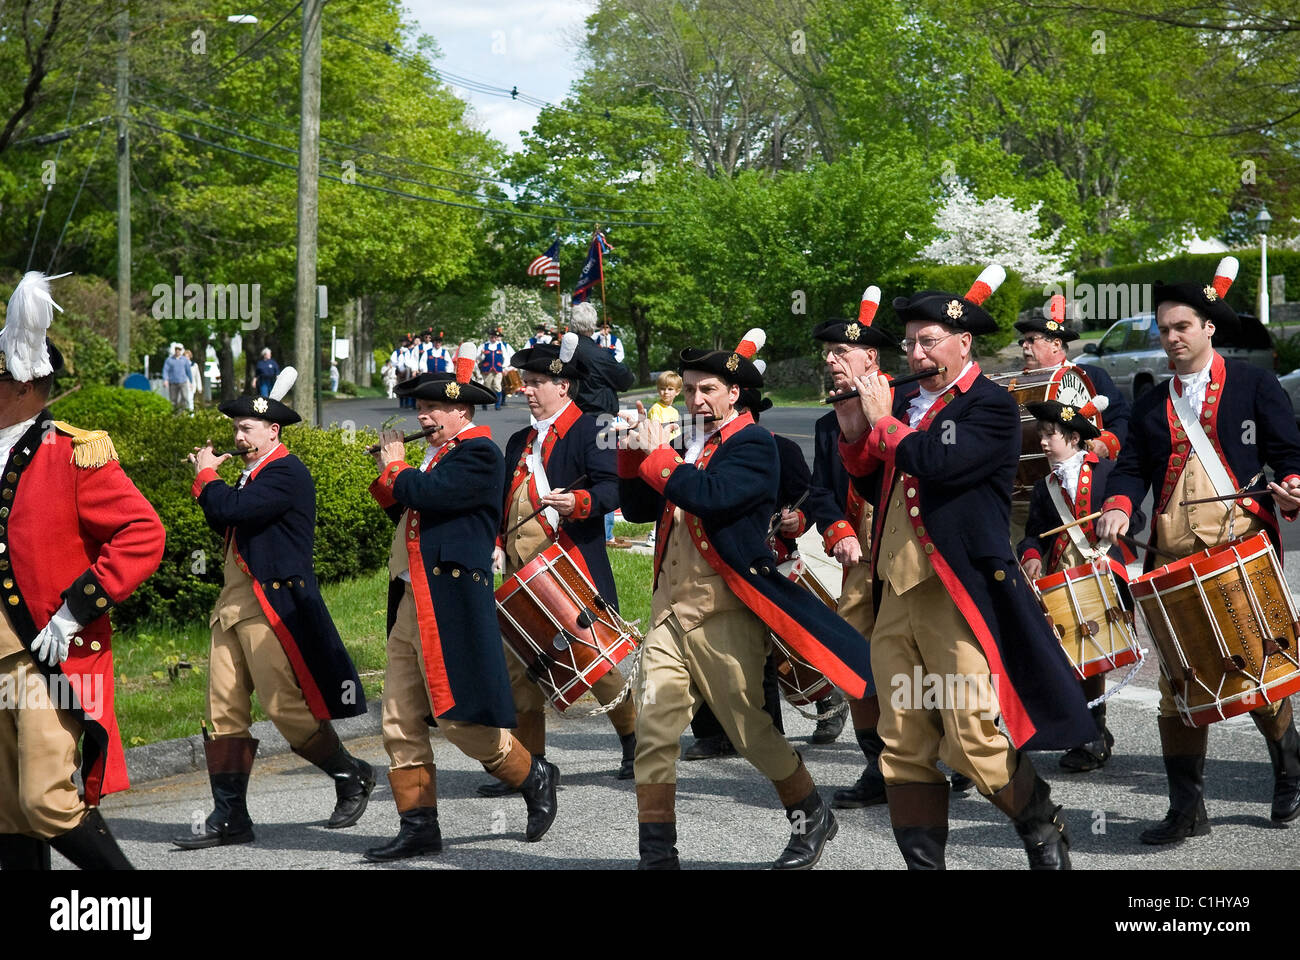 Pipe and drum pageant in Essex, Connecticut, USA Stock Photo